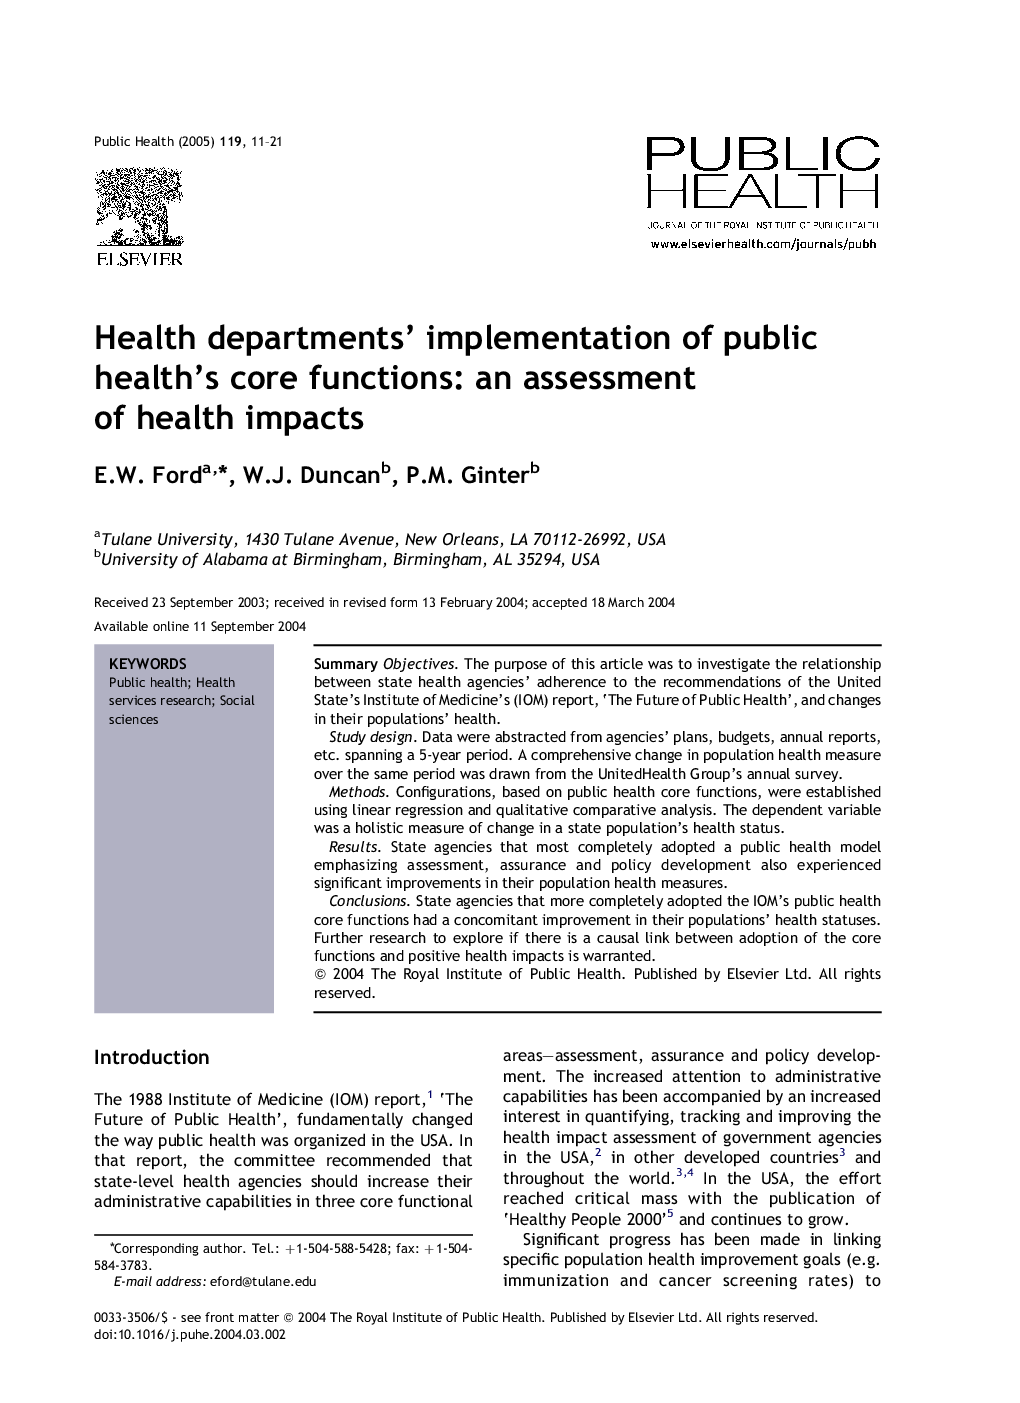 Health departments' implementation of public health's core functions: an assessment of health impacts